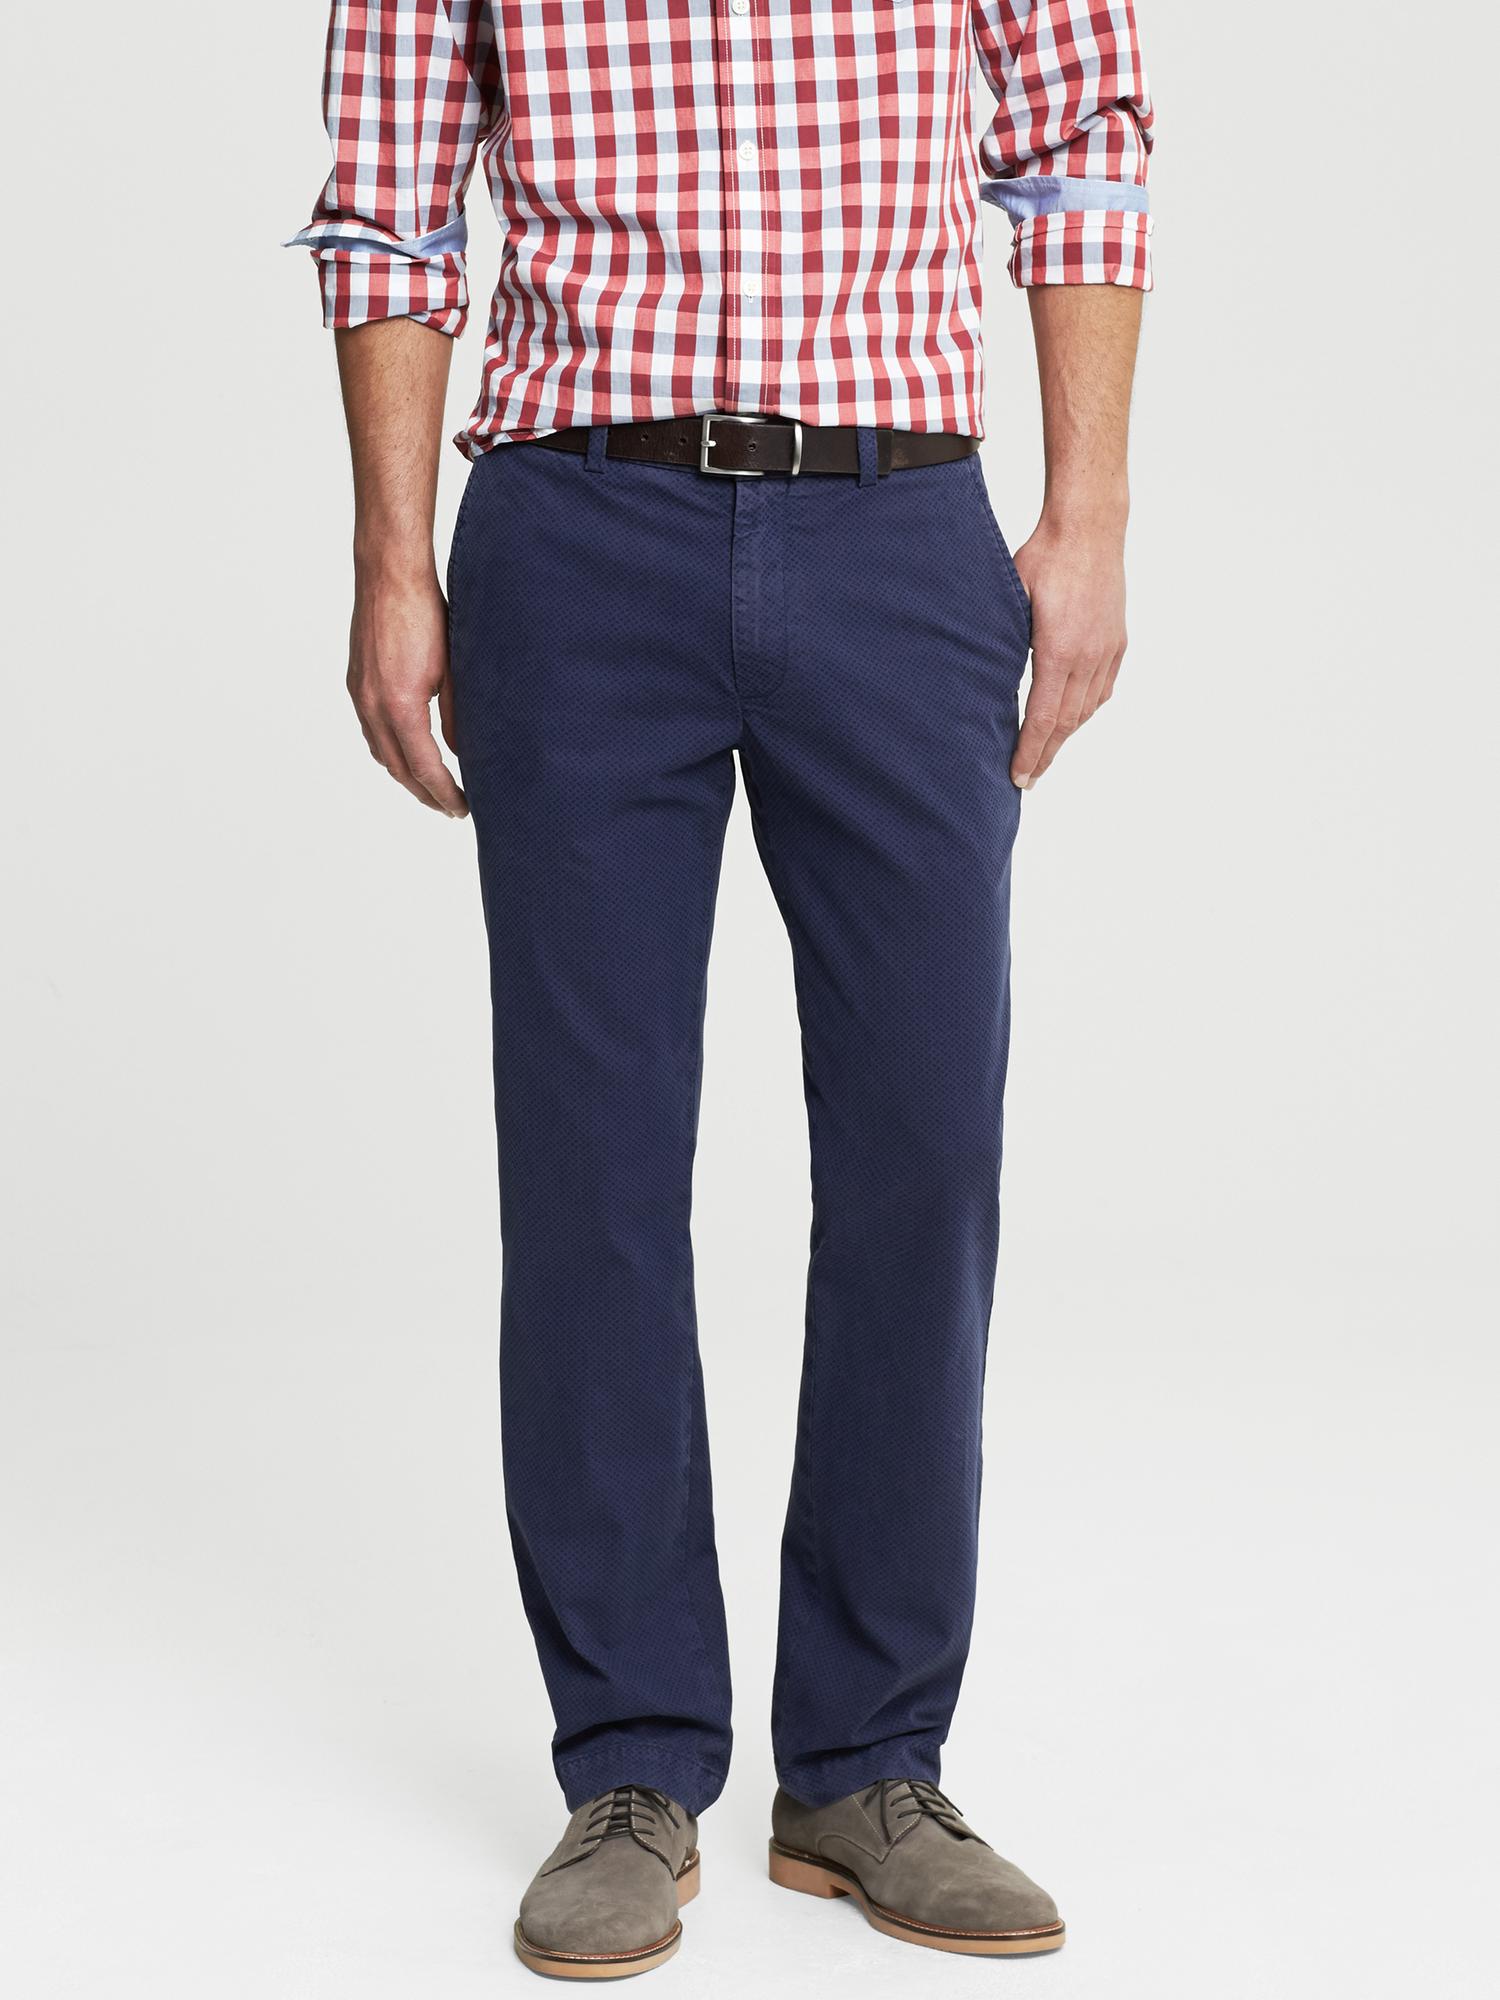 Aiden Slim-Fit Printed Chino